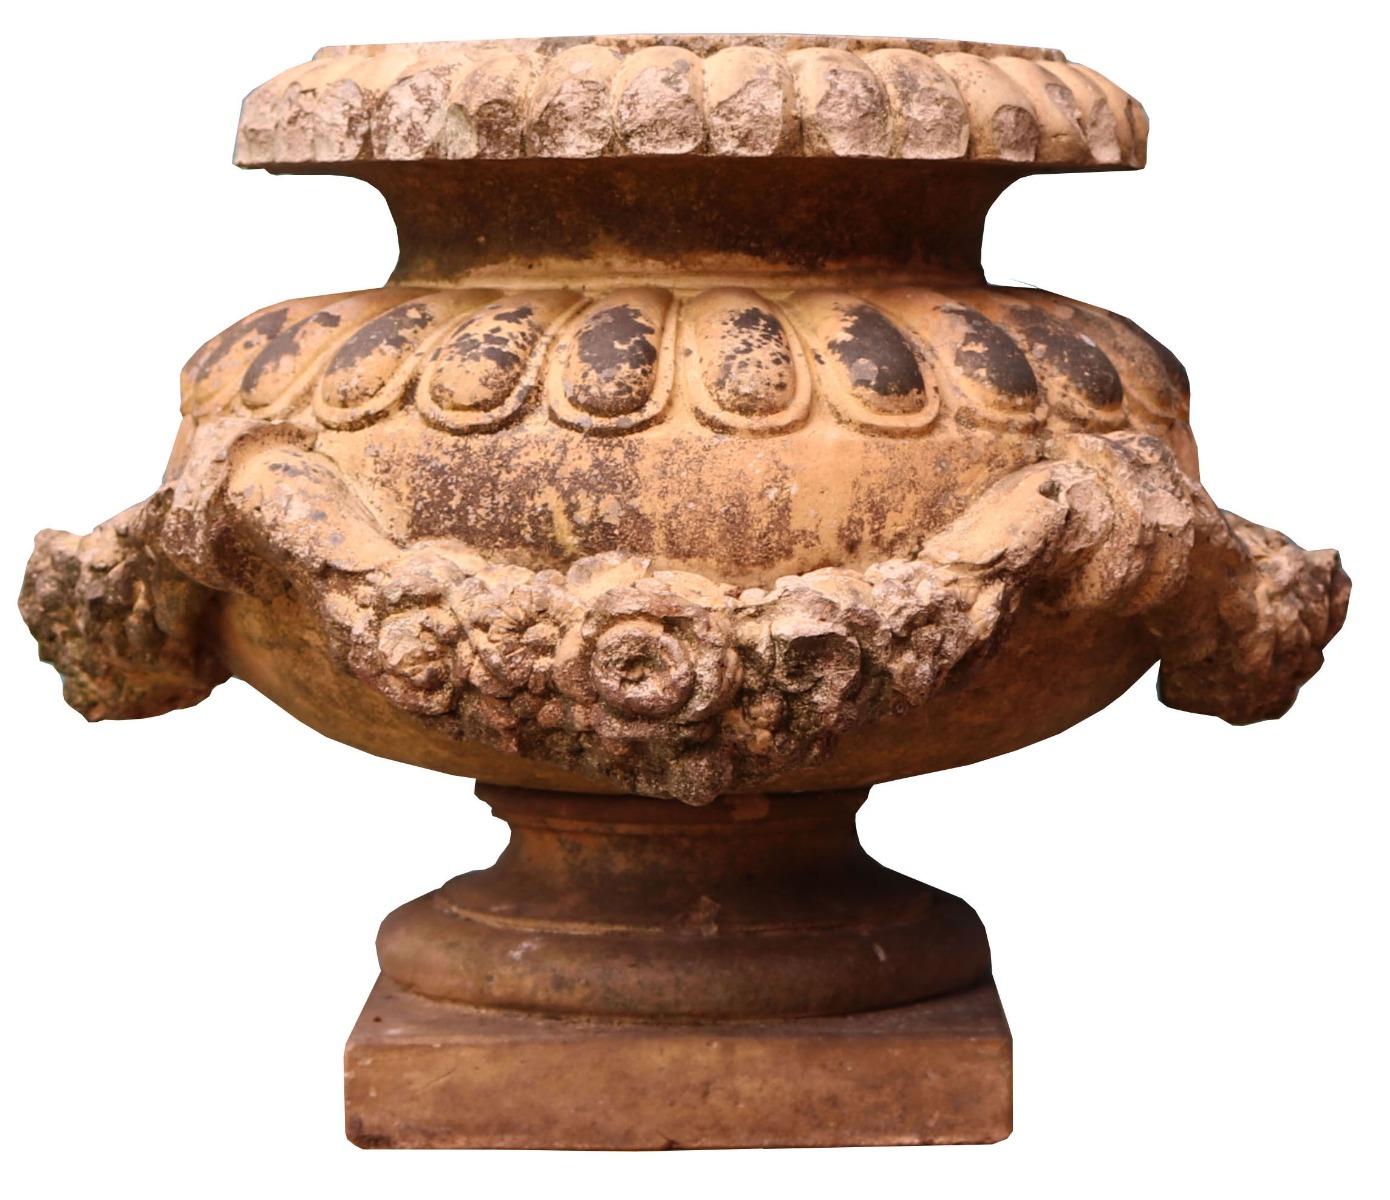 A Doulton terracotta garden urn, decorated with applied floral garlands. Makers stamp inside the bowl.

Additional dimensions:

Width base 21.5 x 21.5 cm

Diameter maximum 45 cm

Internal diameter 17  cm.